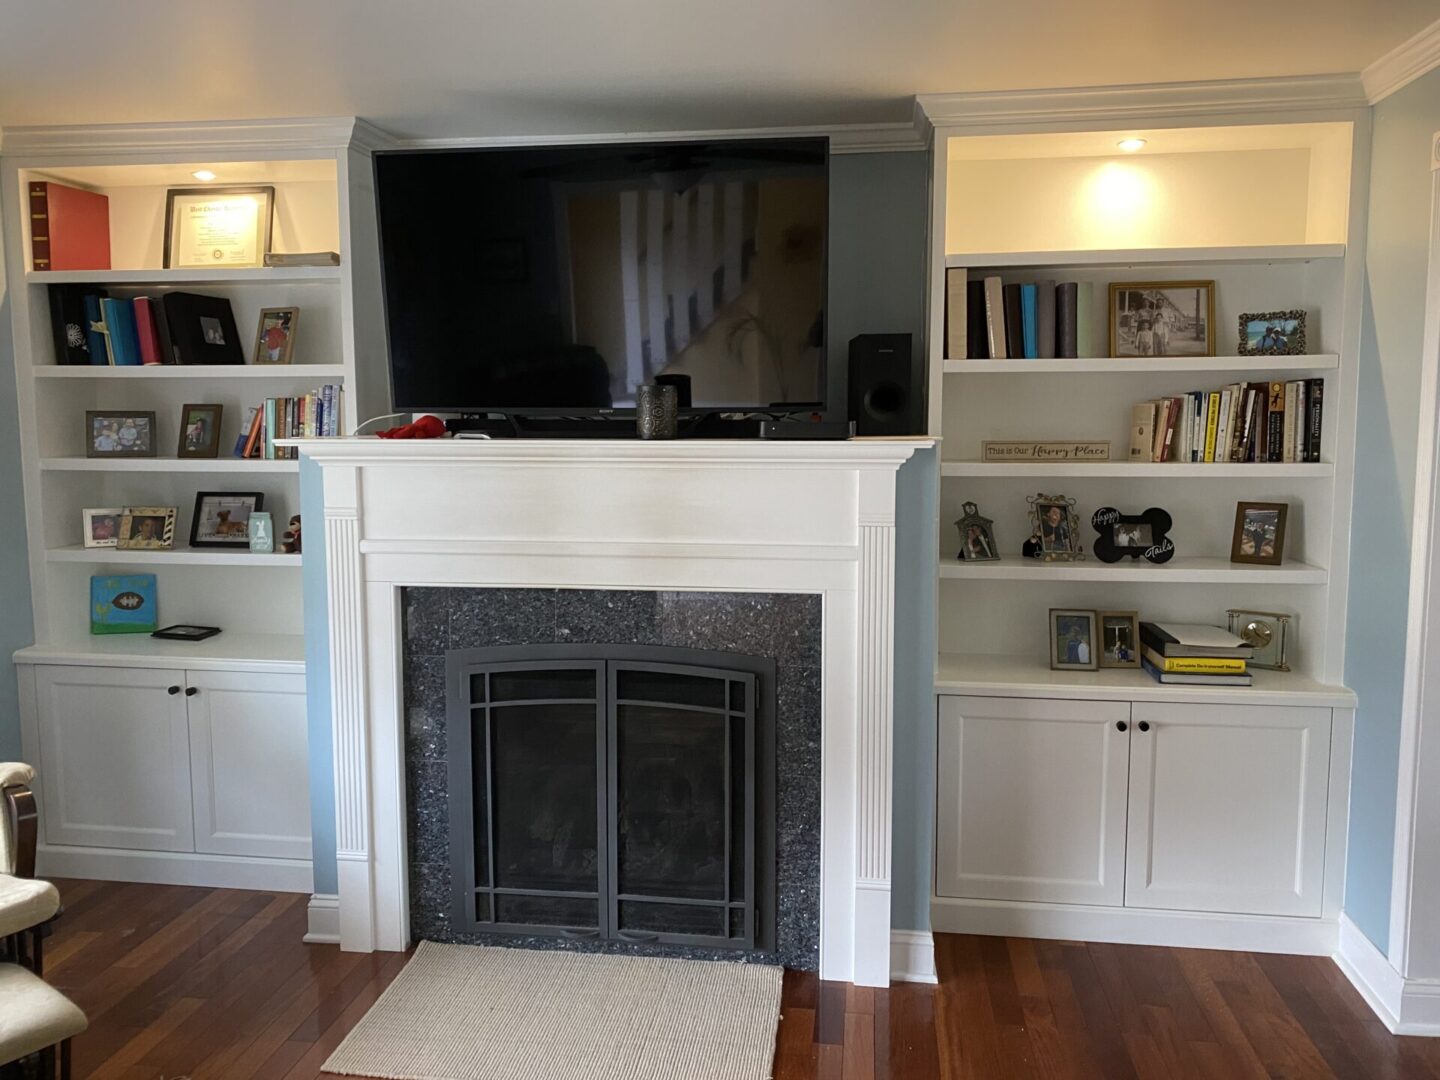 A Flat screen Above a Fireplace With Gates